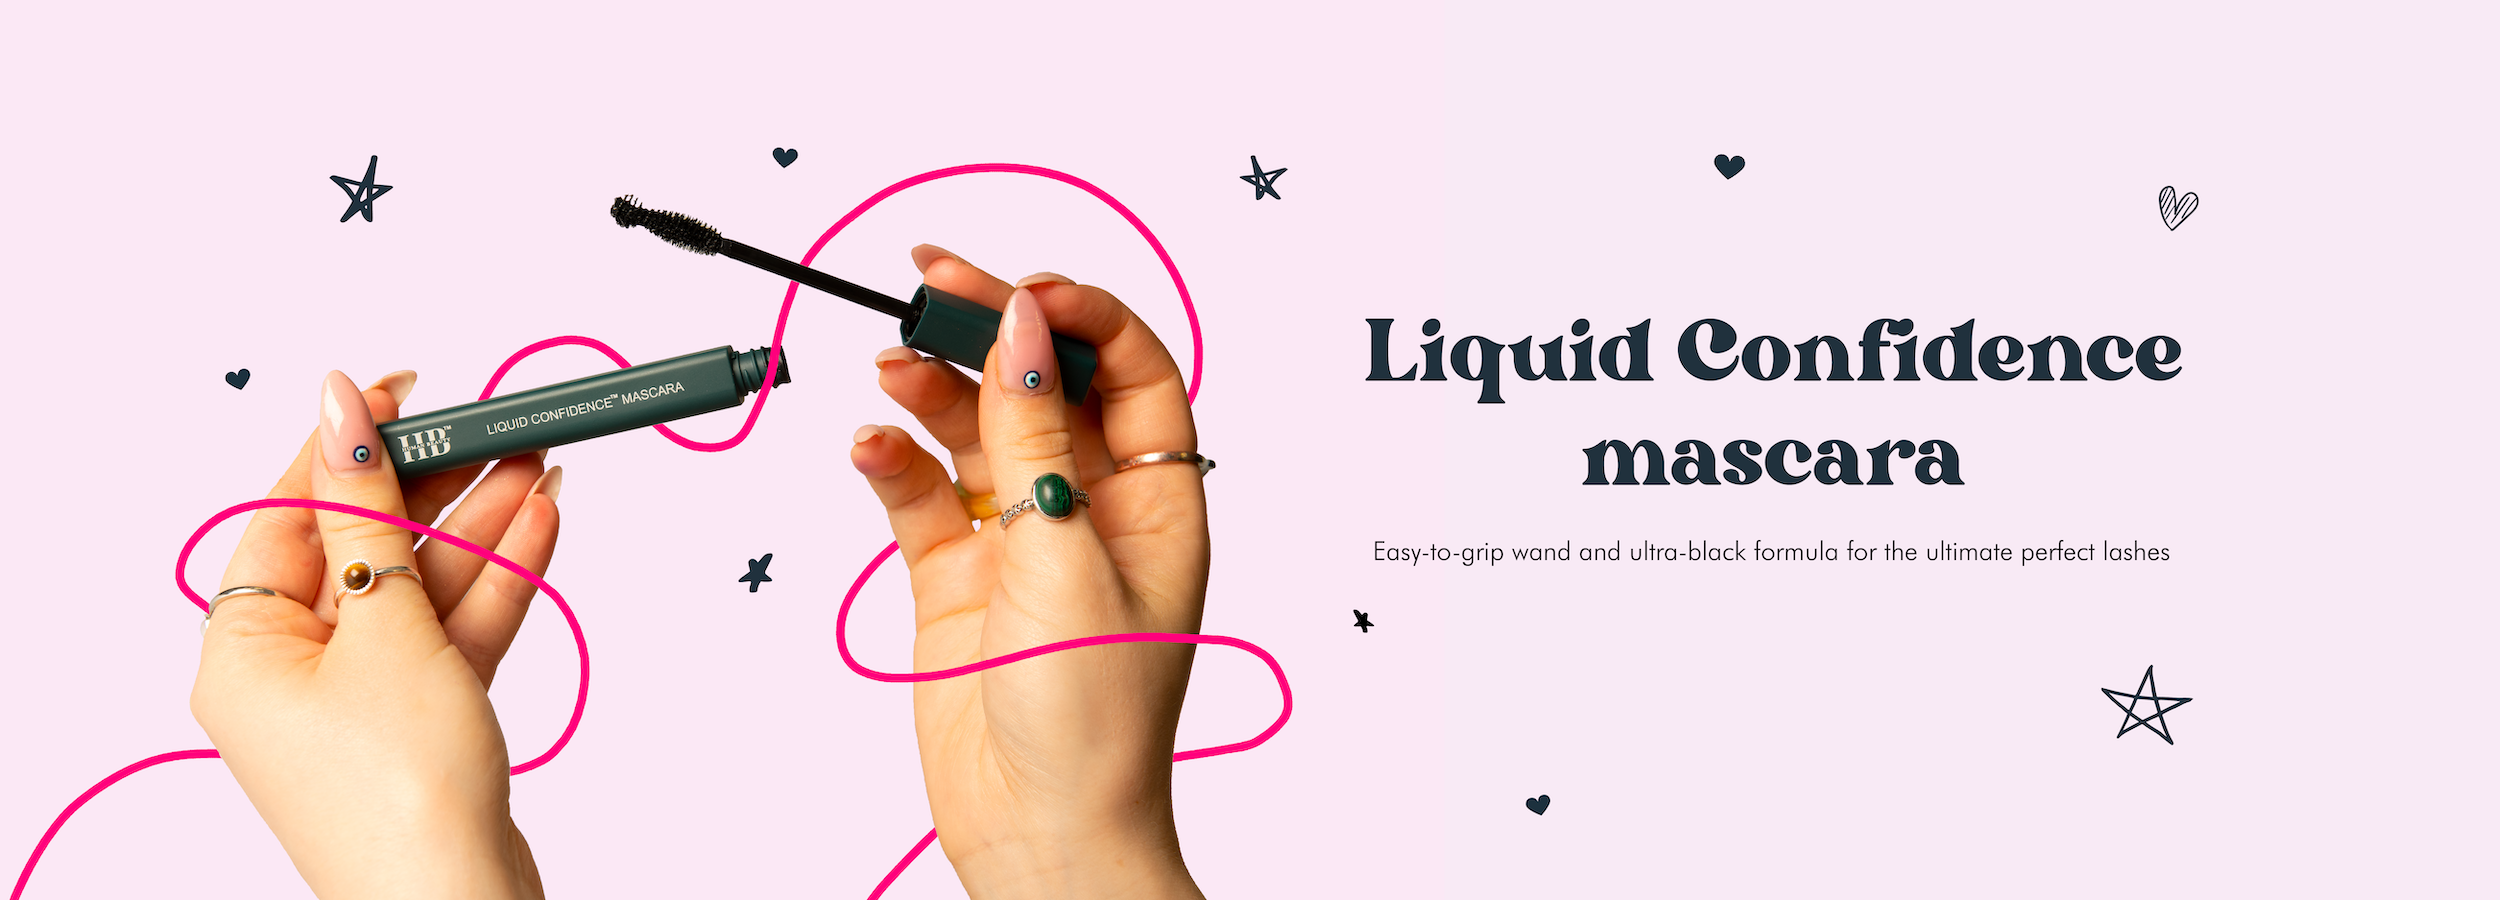 Large visual of the Liquid Confidence mascara being held open by two hands on a light purple background. A text reads "Liquid Confidence Mascara. Easy-to-grip wand and ultra-black formula for the ultimate perfect lashes".